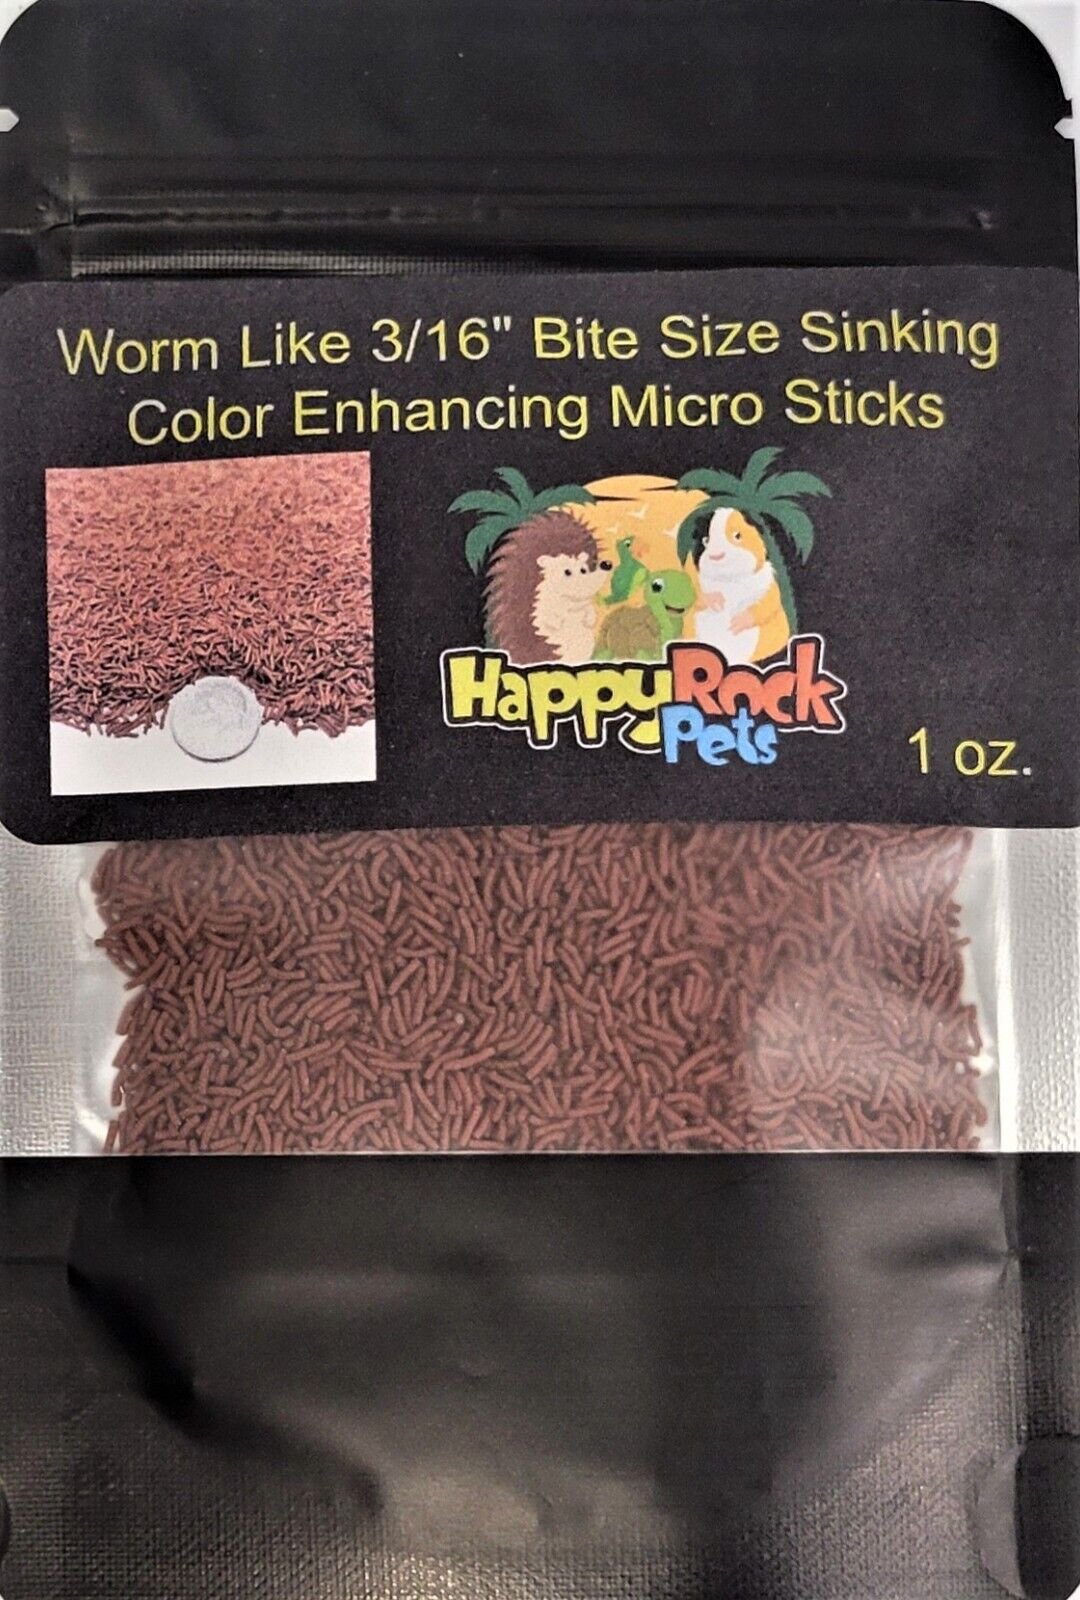 Worm Like 3/16" Bite Size Sinking Color Enhancing Micro Sticks for All Fish.